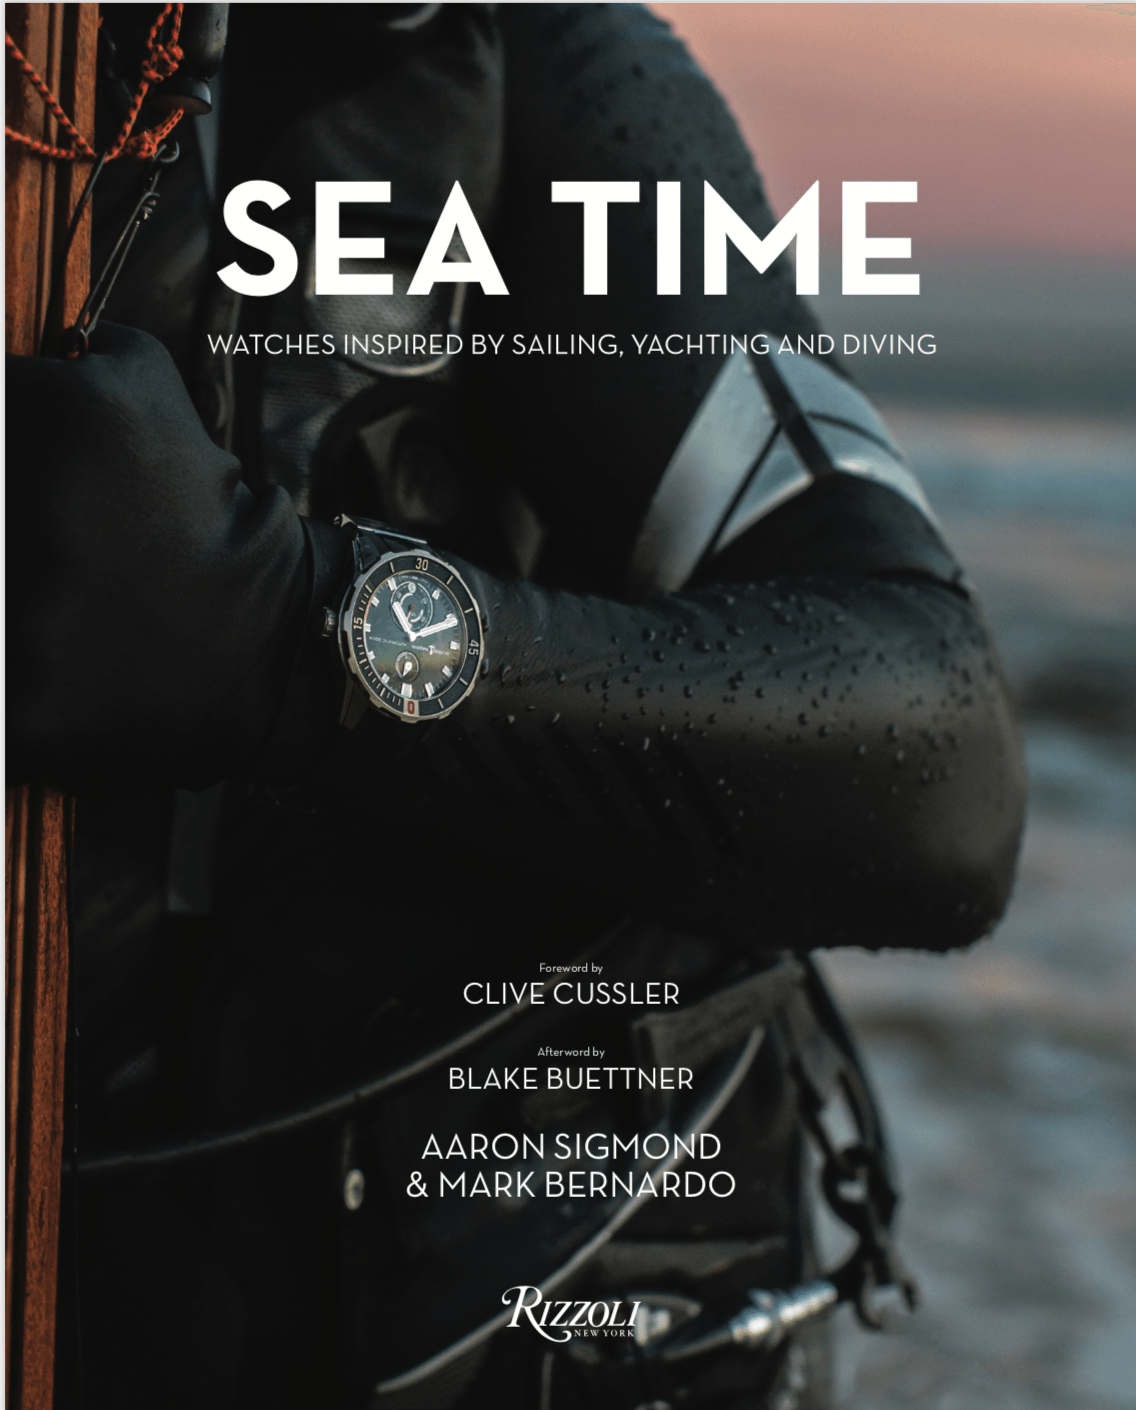 Hardcover of Sea Time: Watches Inspired by Sailing, Yachting and Diving, published by Rizzoli.